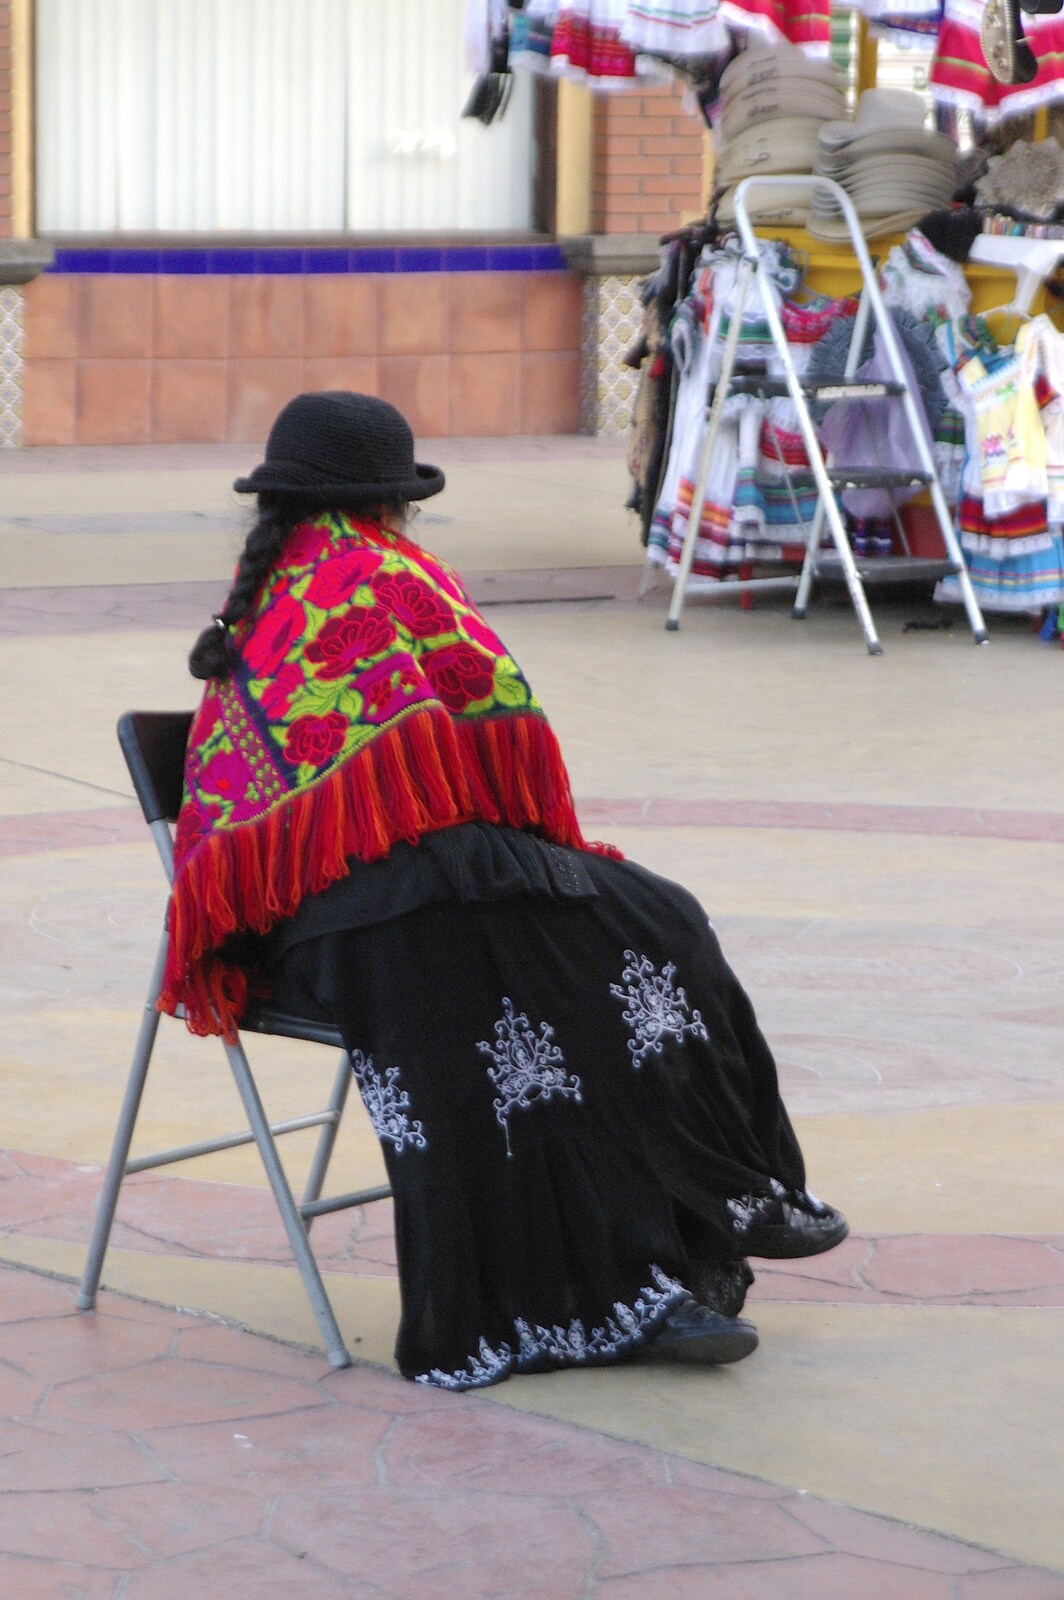 Rosarito and Tijuana, Baja California, Mexico - 2nd March 2008: A woman in some sort of traditional garb waits